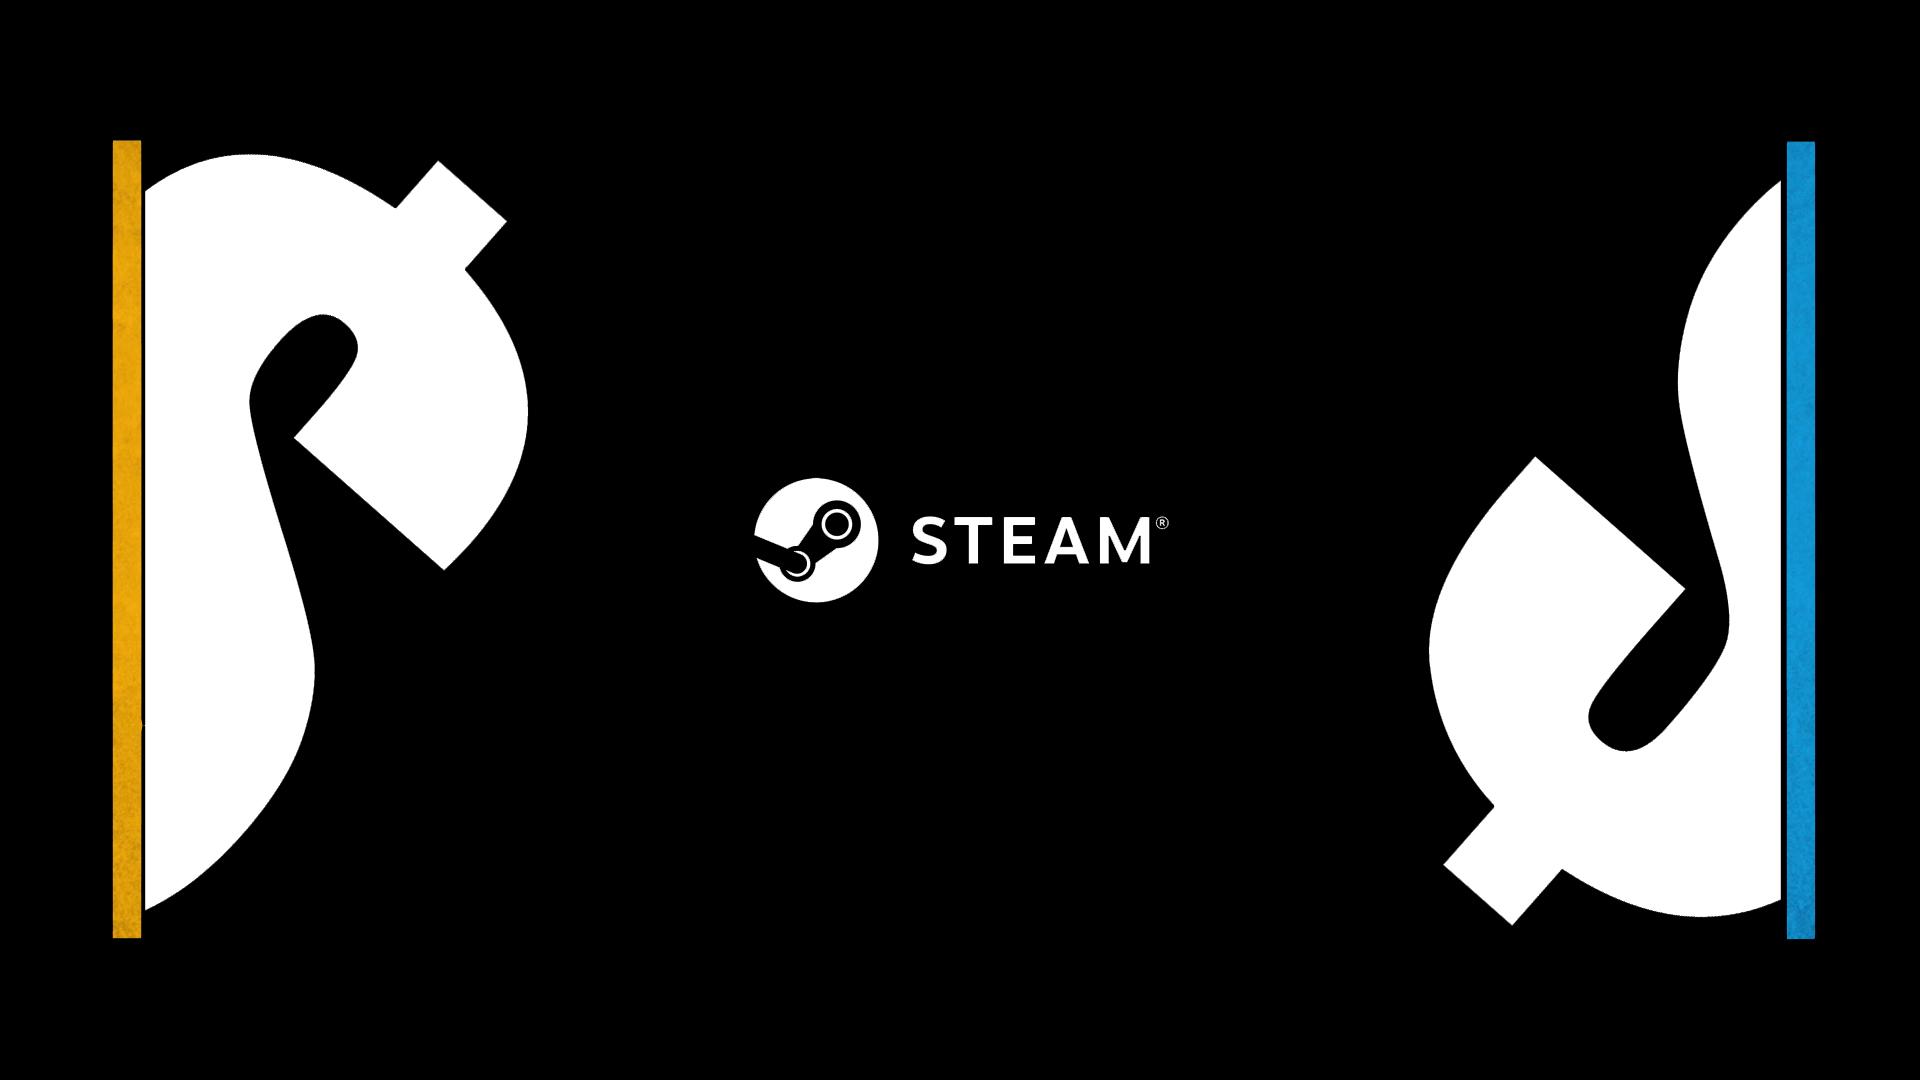 Here’s Valve’s official statement after its Australian refund-rights loss